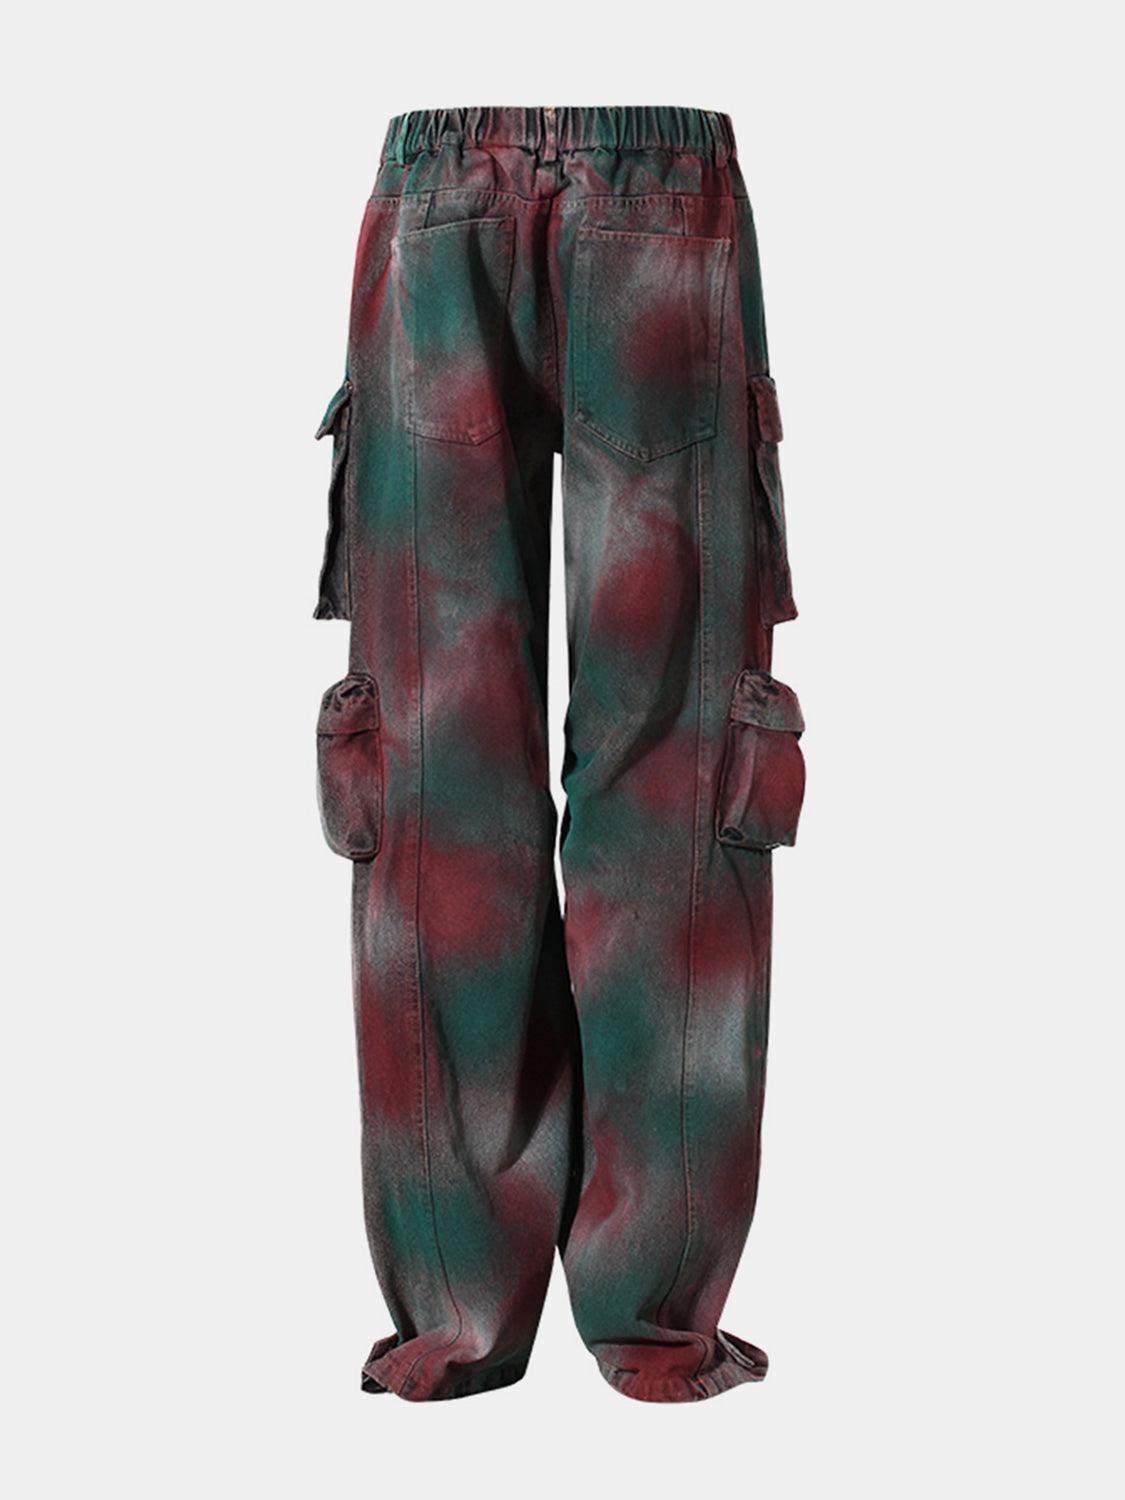 a pair of red and green cargo pants